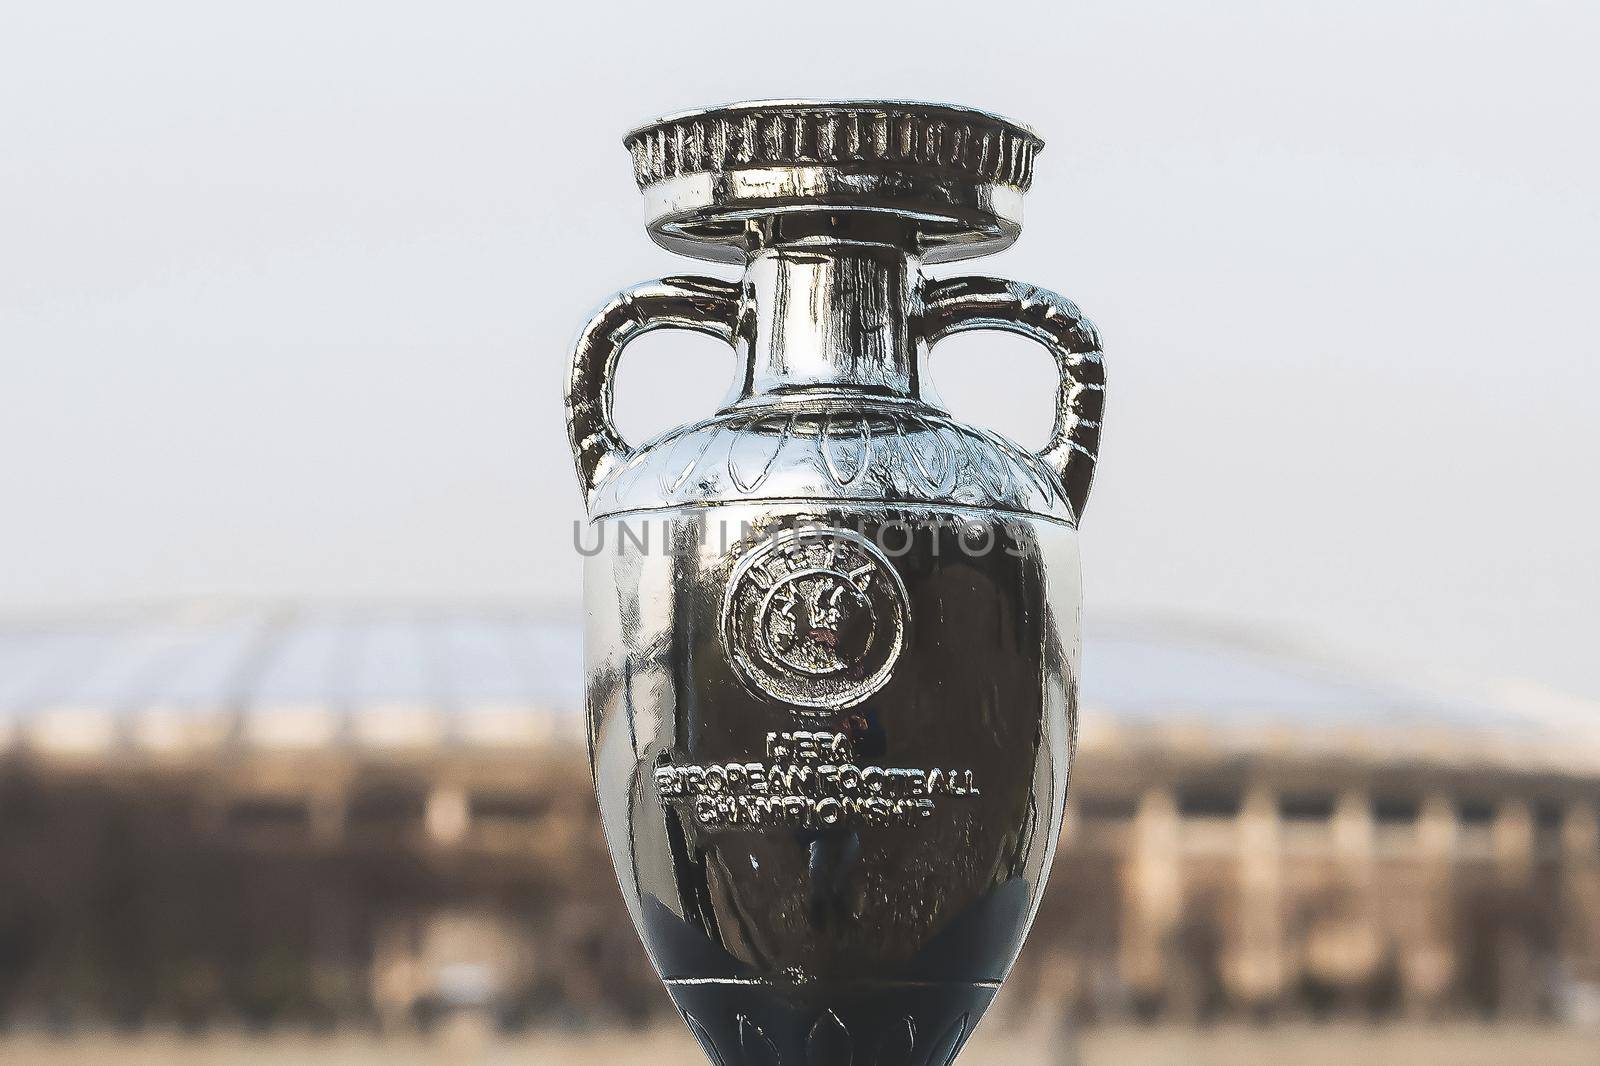 April 13, 2021 Moscow, Russia. European Championship Cup on the background of the Luzhniki Stadium.